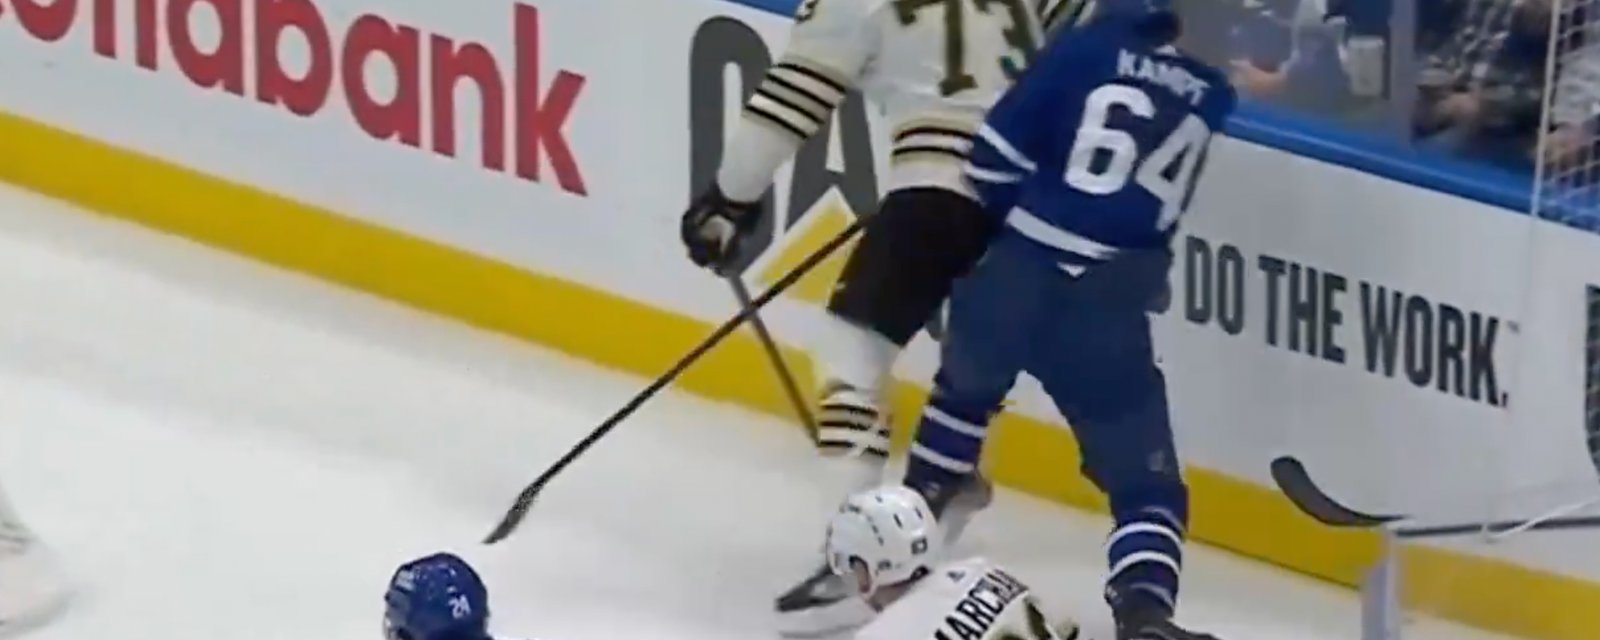 Leafs fans furious as Bruins avoid blatant suspension ahead of Game time 7!